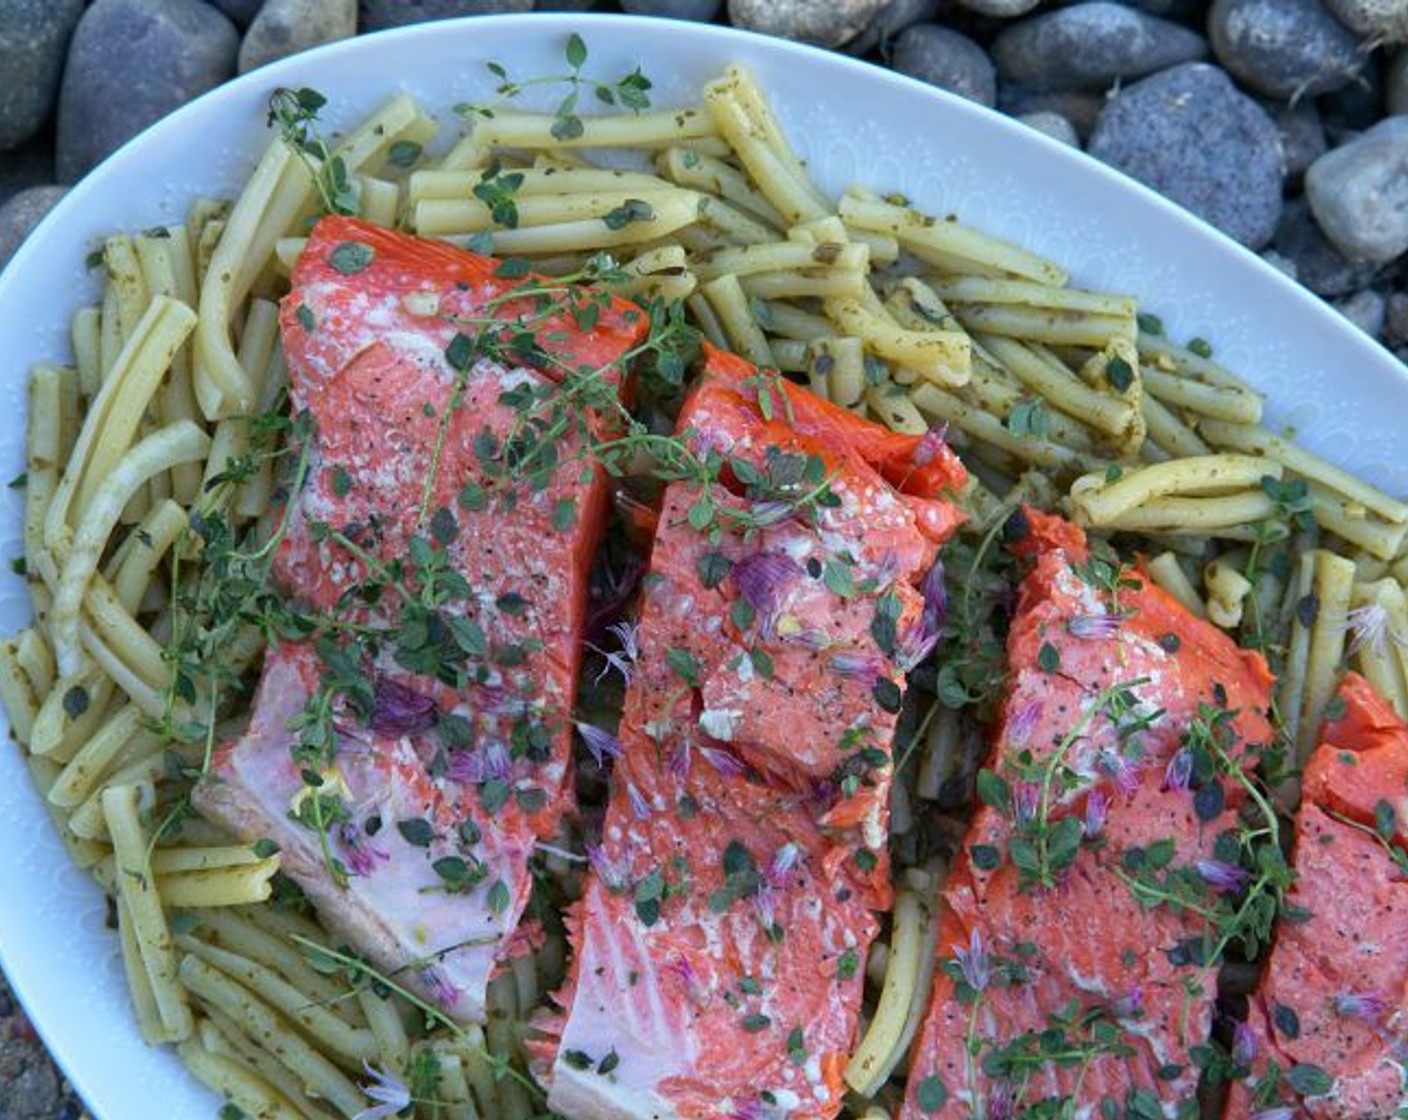 step 10 Drain your pasta and mix well with the pesto. Add to your serving platter. Top with the cooked salmon. Serve immediately. Enjoy!